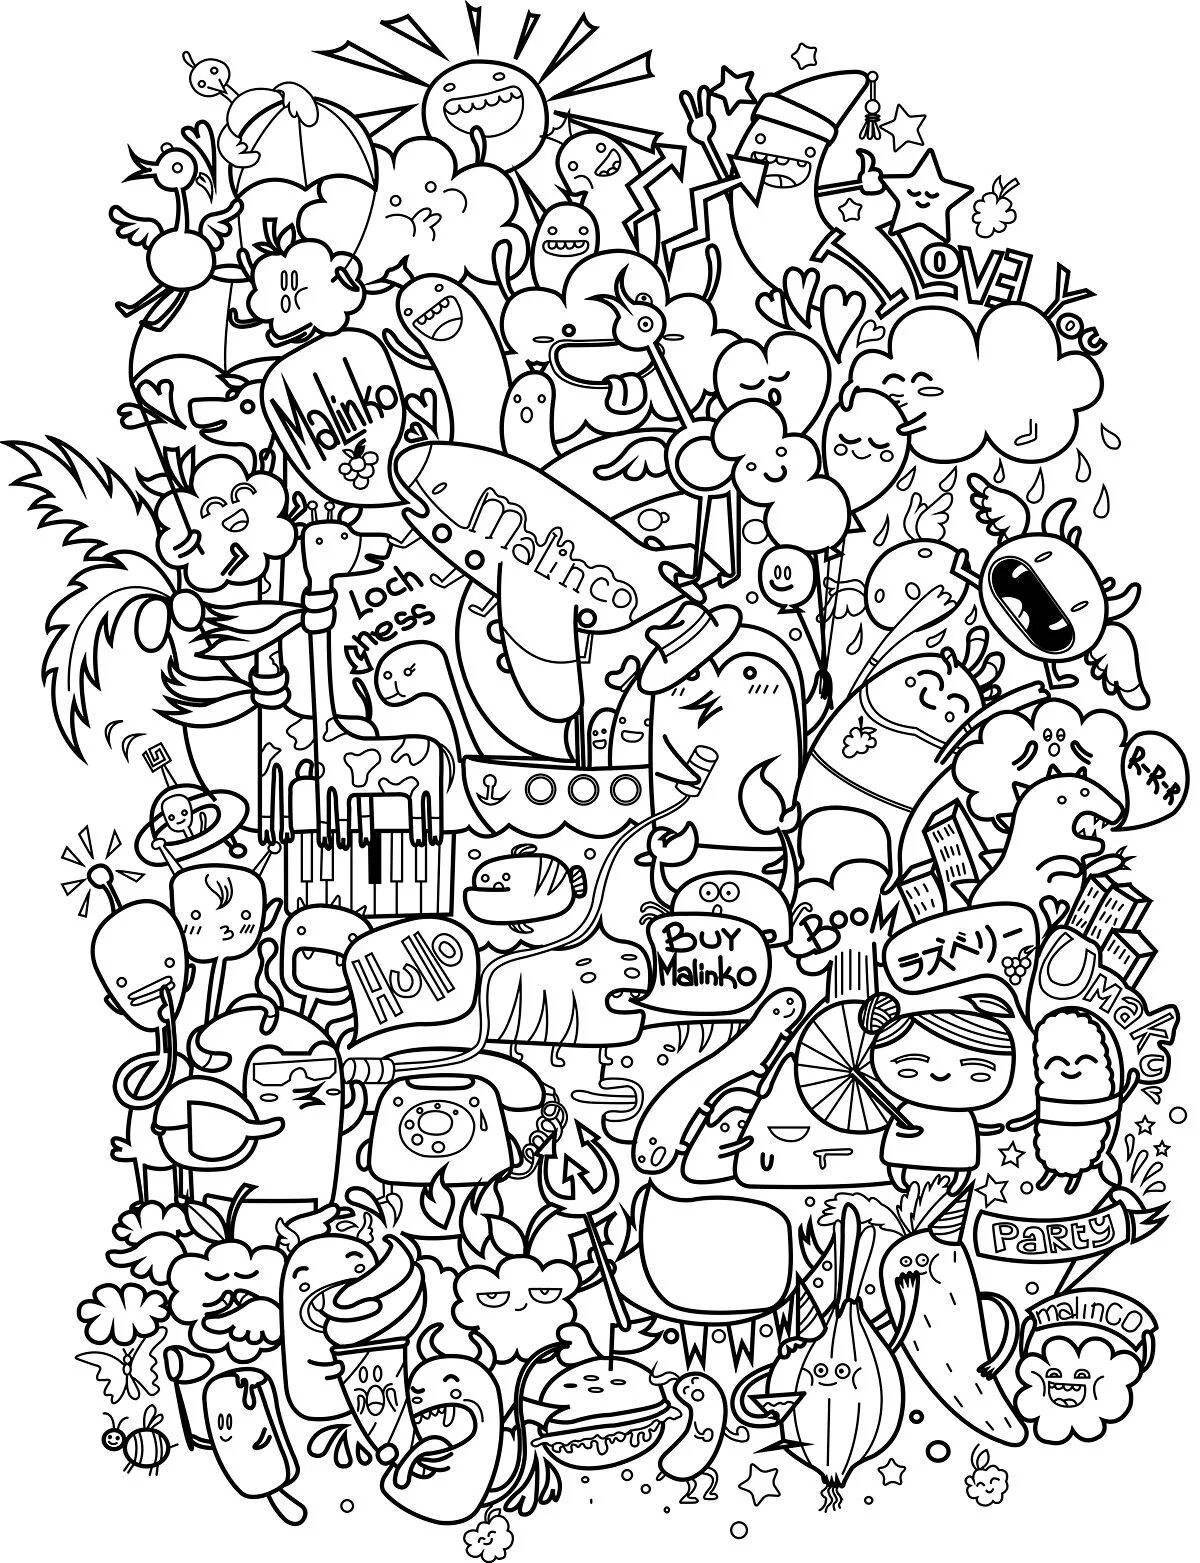 Doodlemania animated coloring book